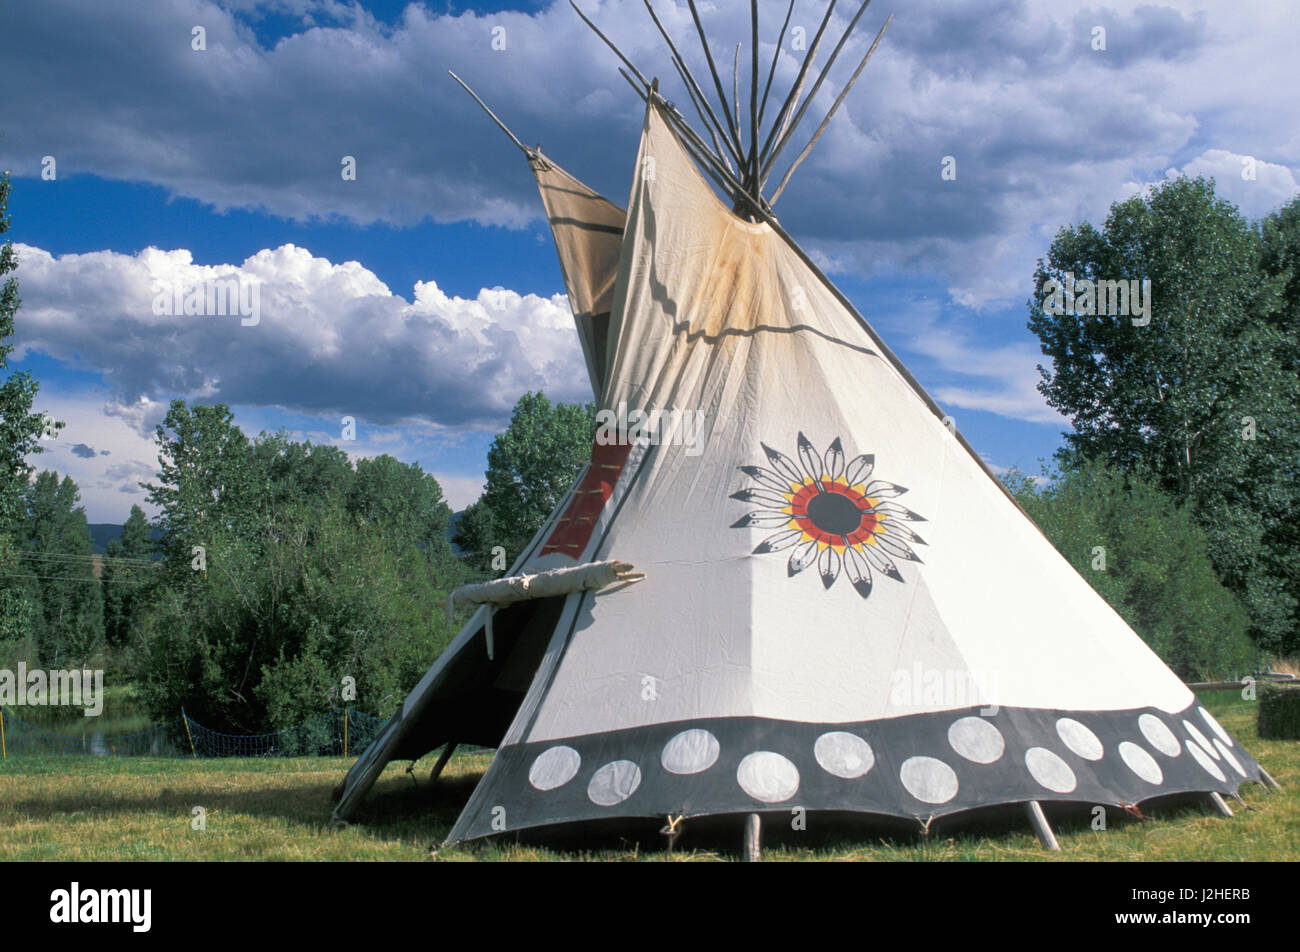 Painted and decorated Blackfeet tepee with the Blackfeet circular symbol and painted dots on the bottom border Stock Photo